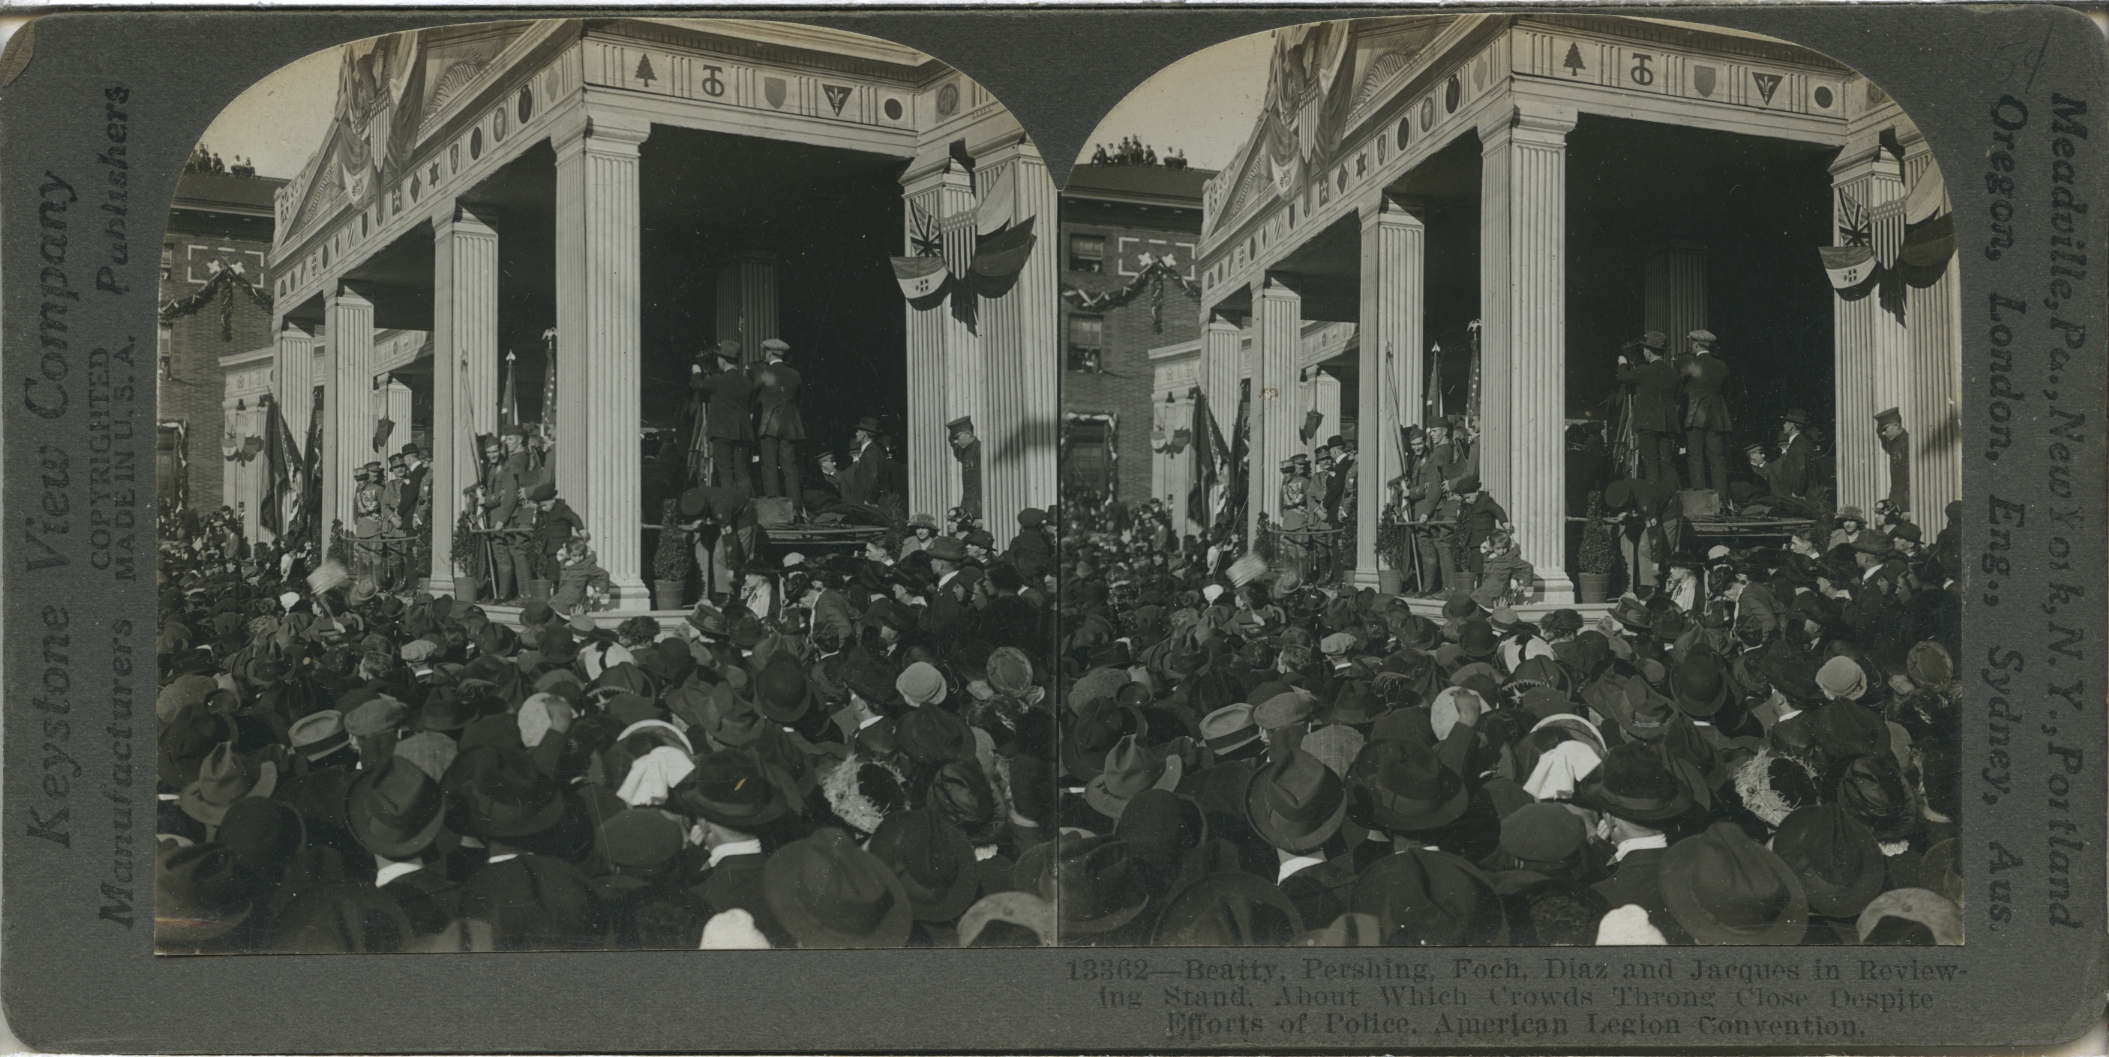 Beatty, Pershing, Foch, Diaz and Jacques in Reviewing Stand, About Which Crowds Throng Close Despite Efforts of Police. American Legion Convention